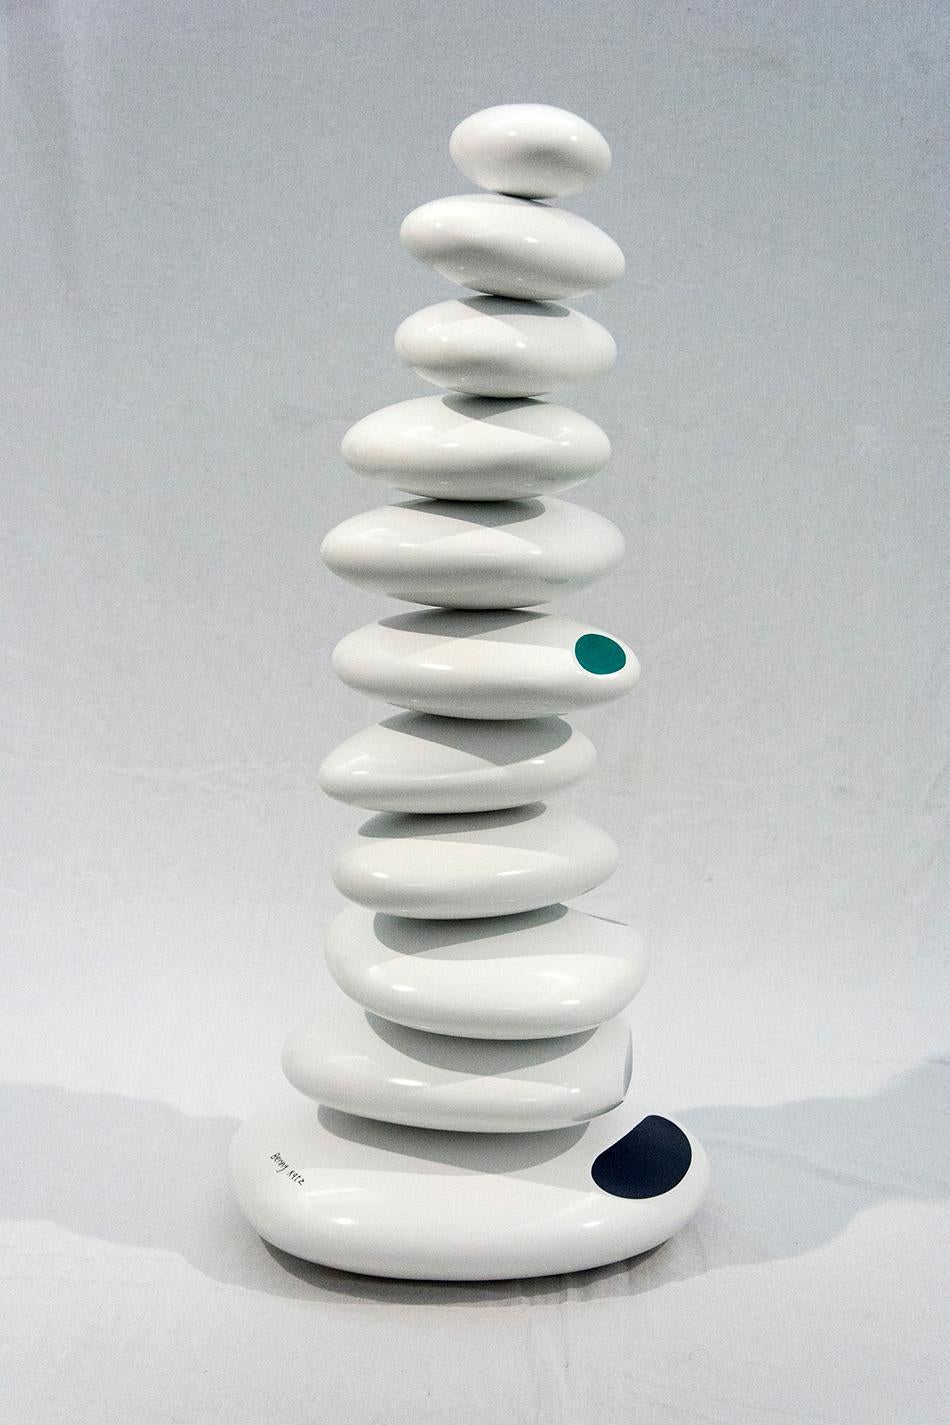 Ocean - small stacked sculpture of white ovals, with blue and green highlights - Sculpture by Benny Katz